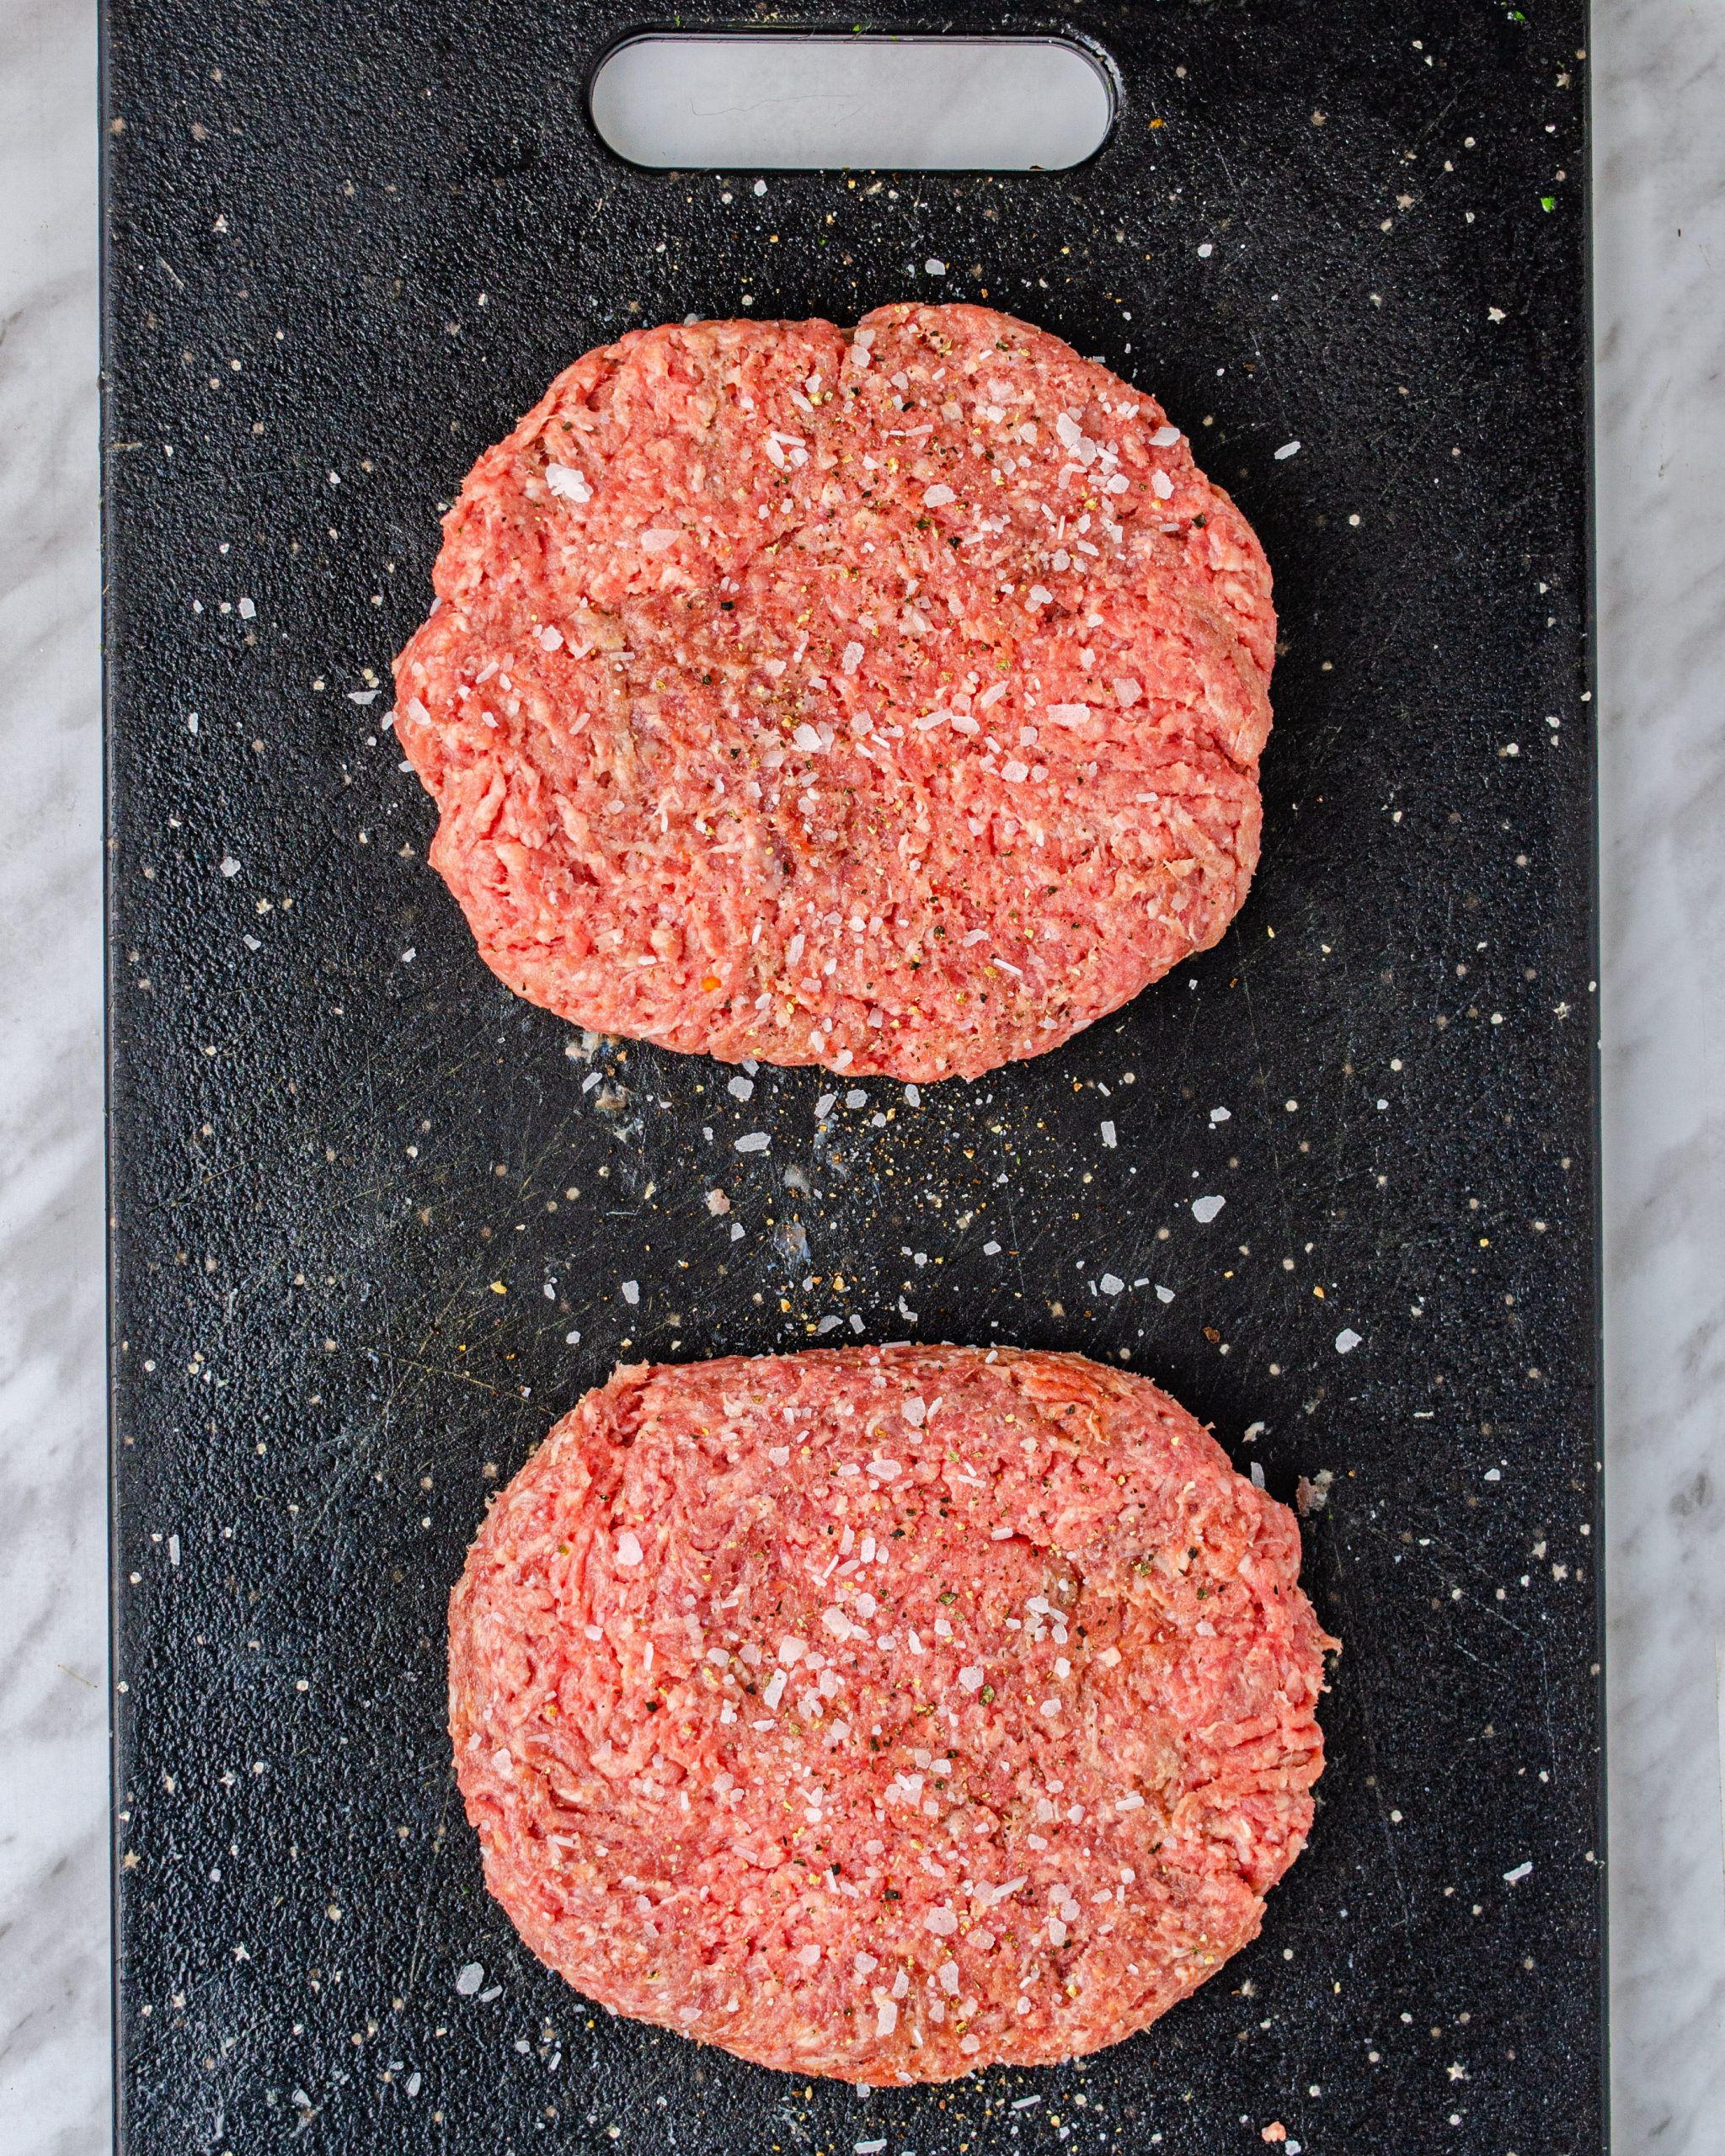 Form the ground beef into two separate patties and season with salt and pepper to taste.